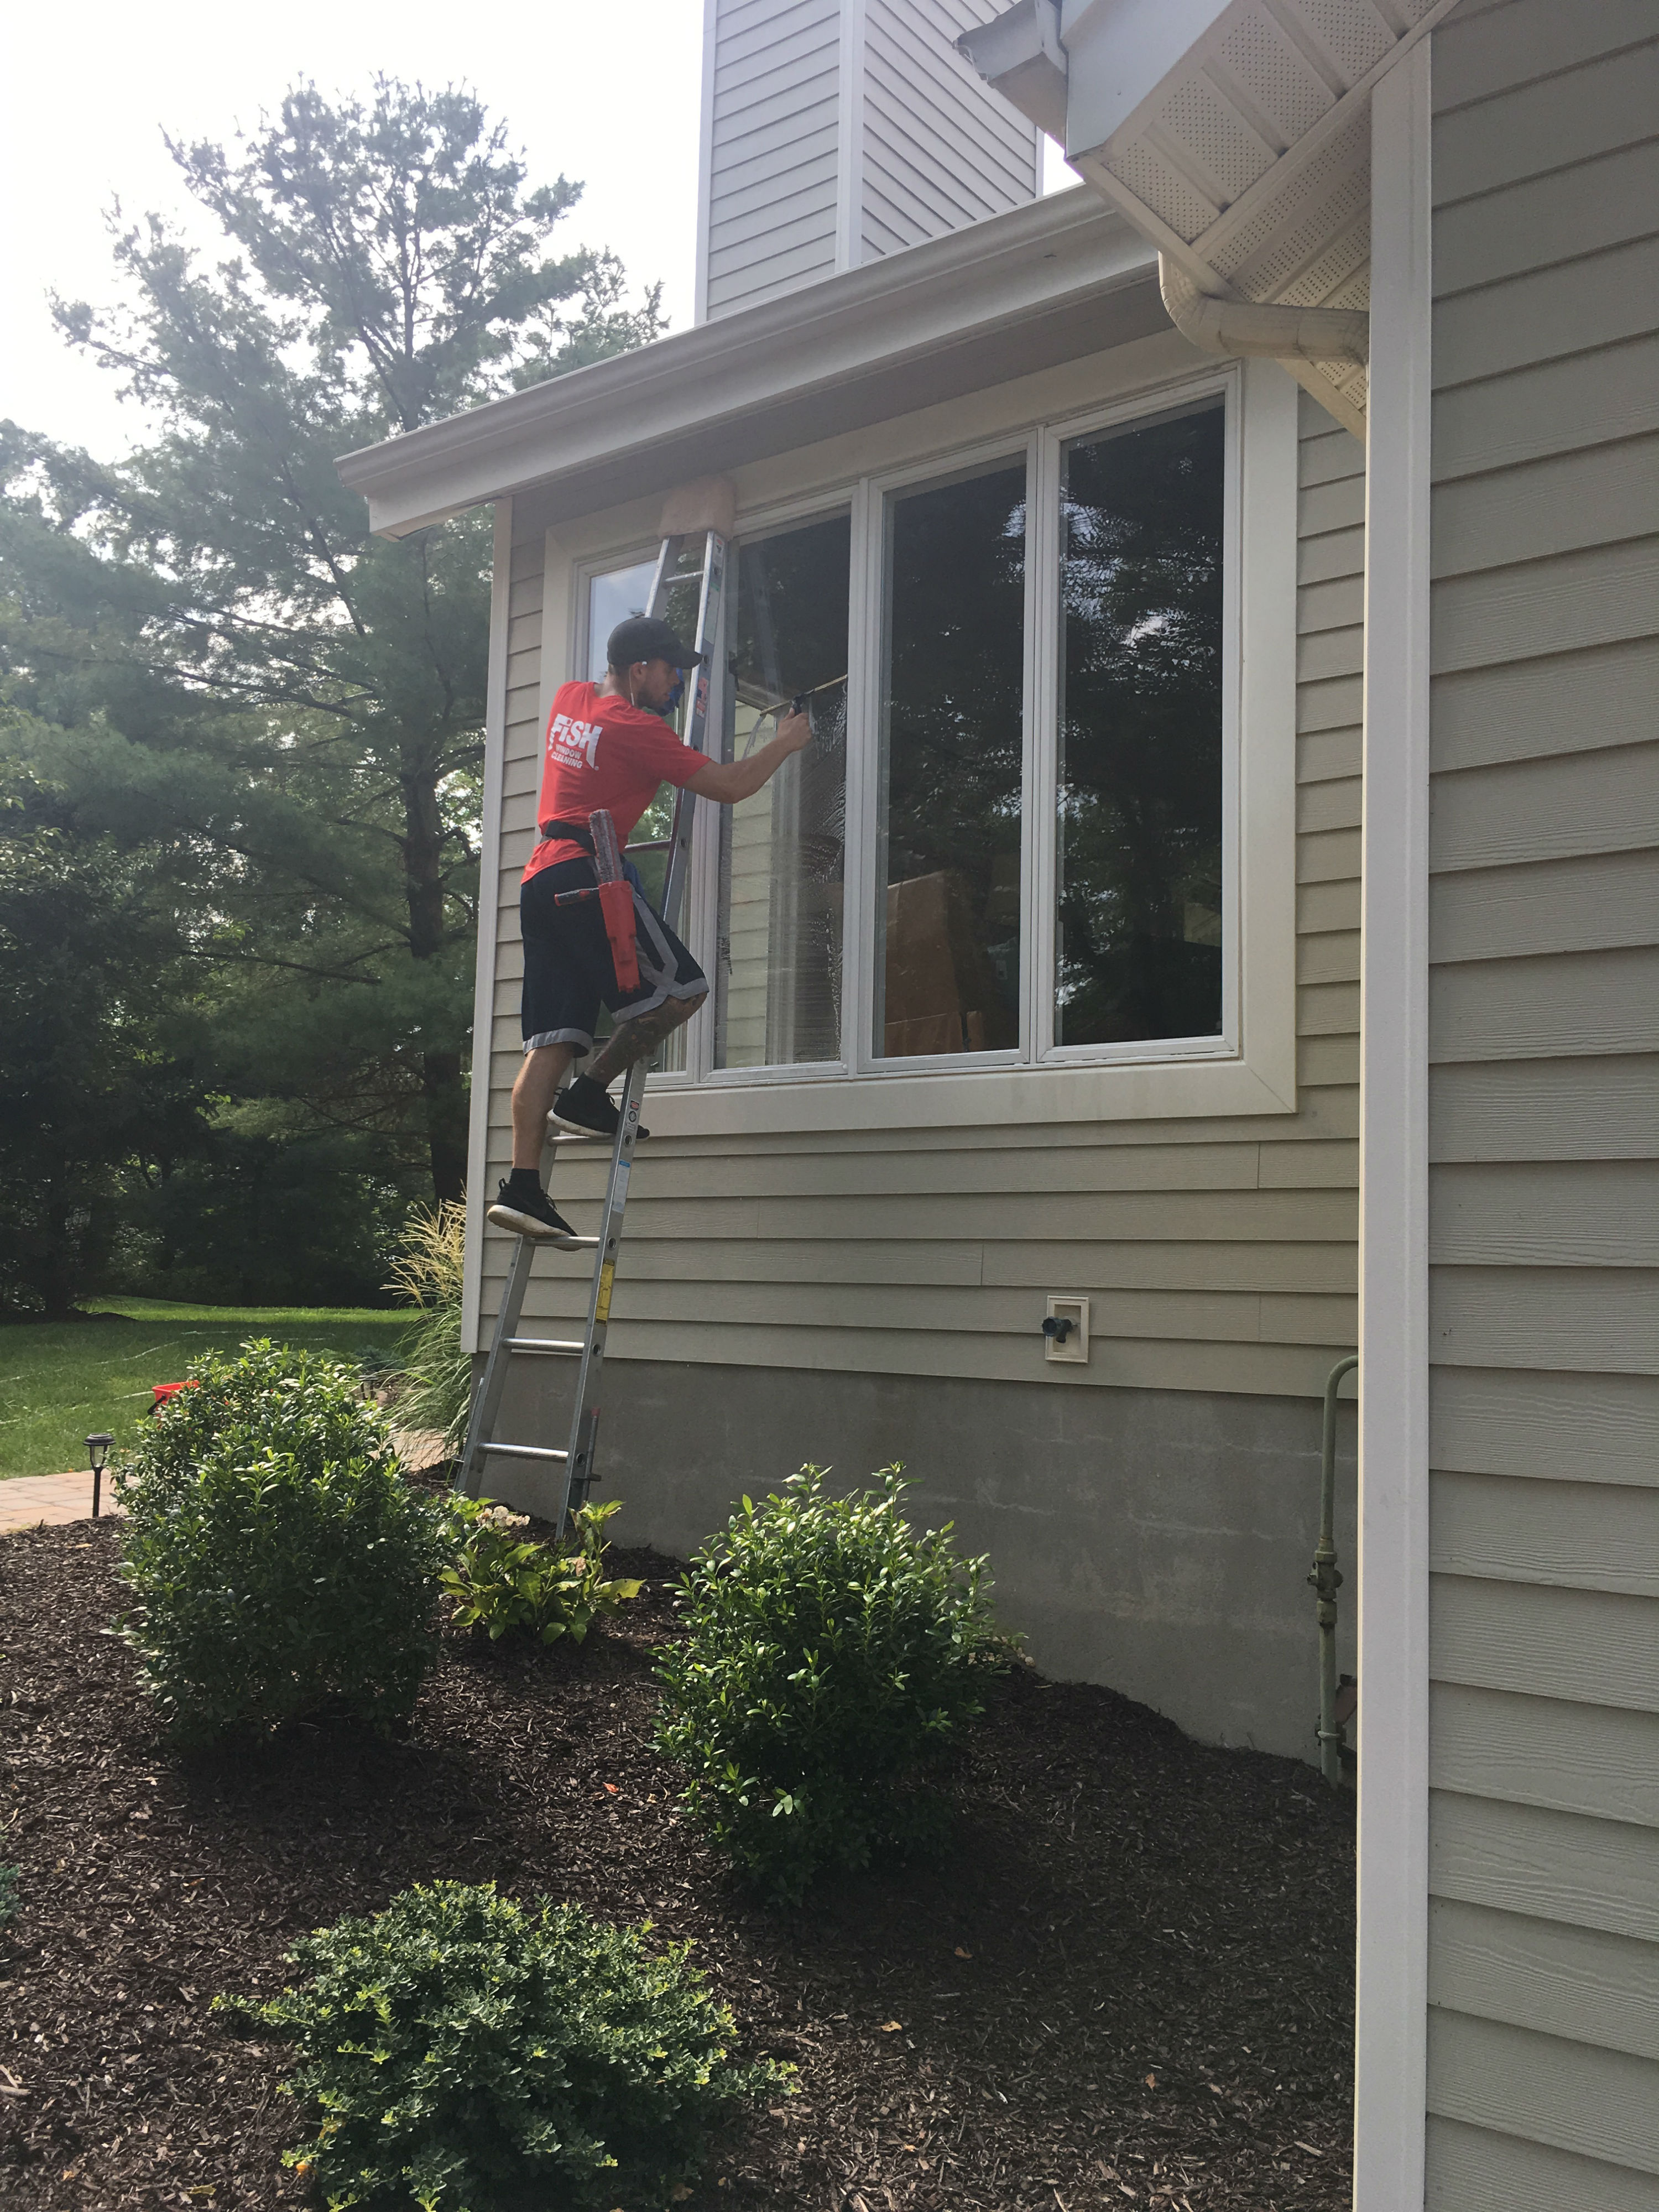 Window Cleaner on Ladder Cleaning Exterior Home Windows